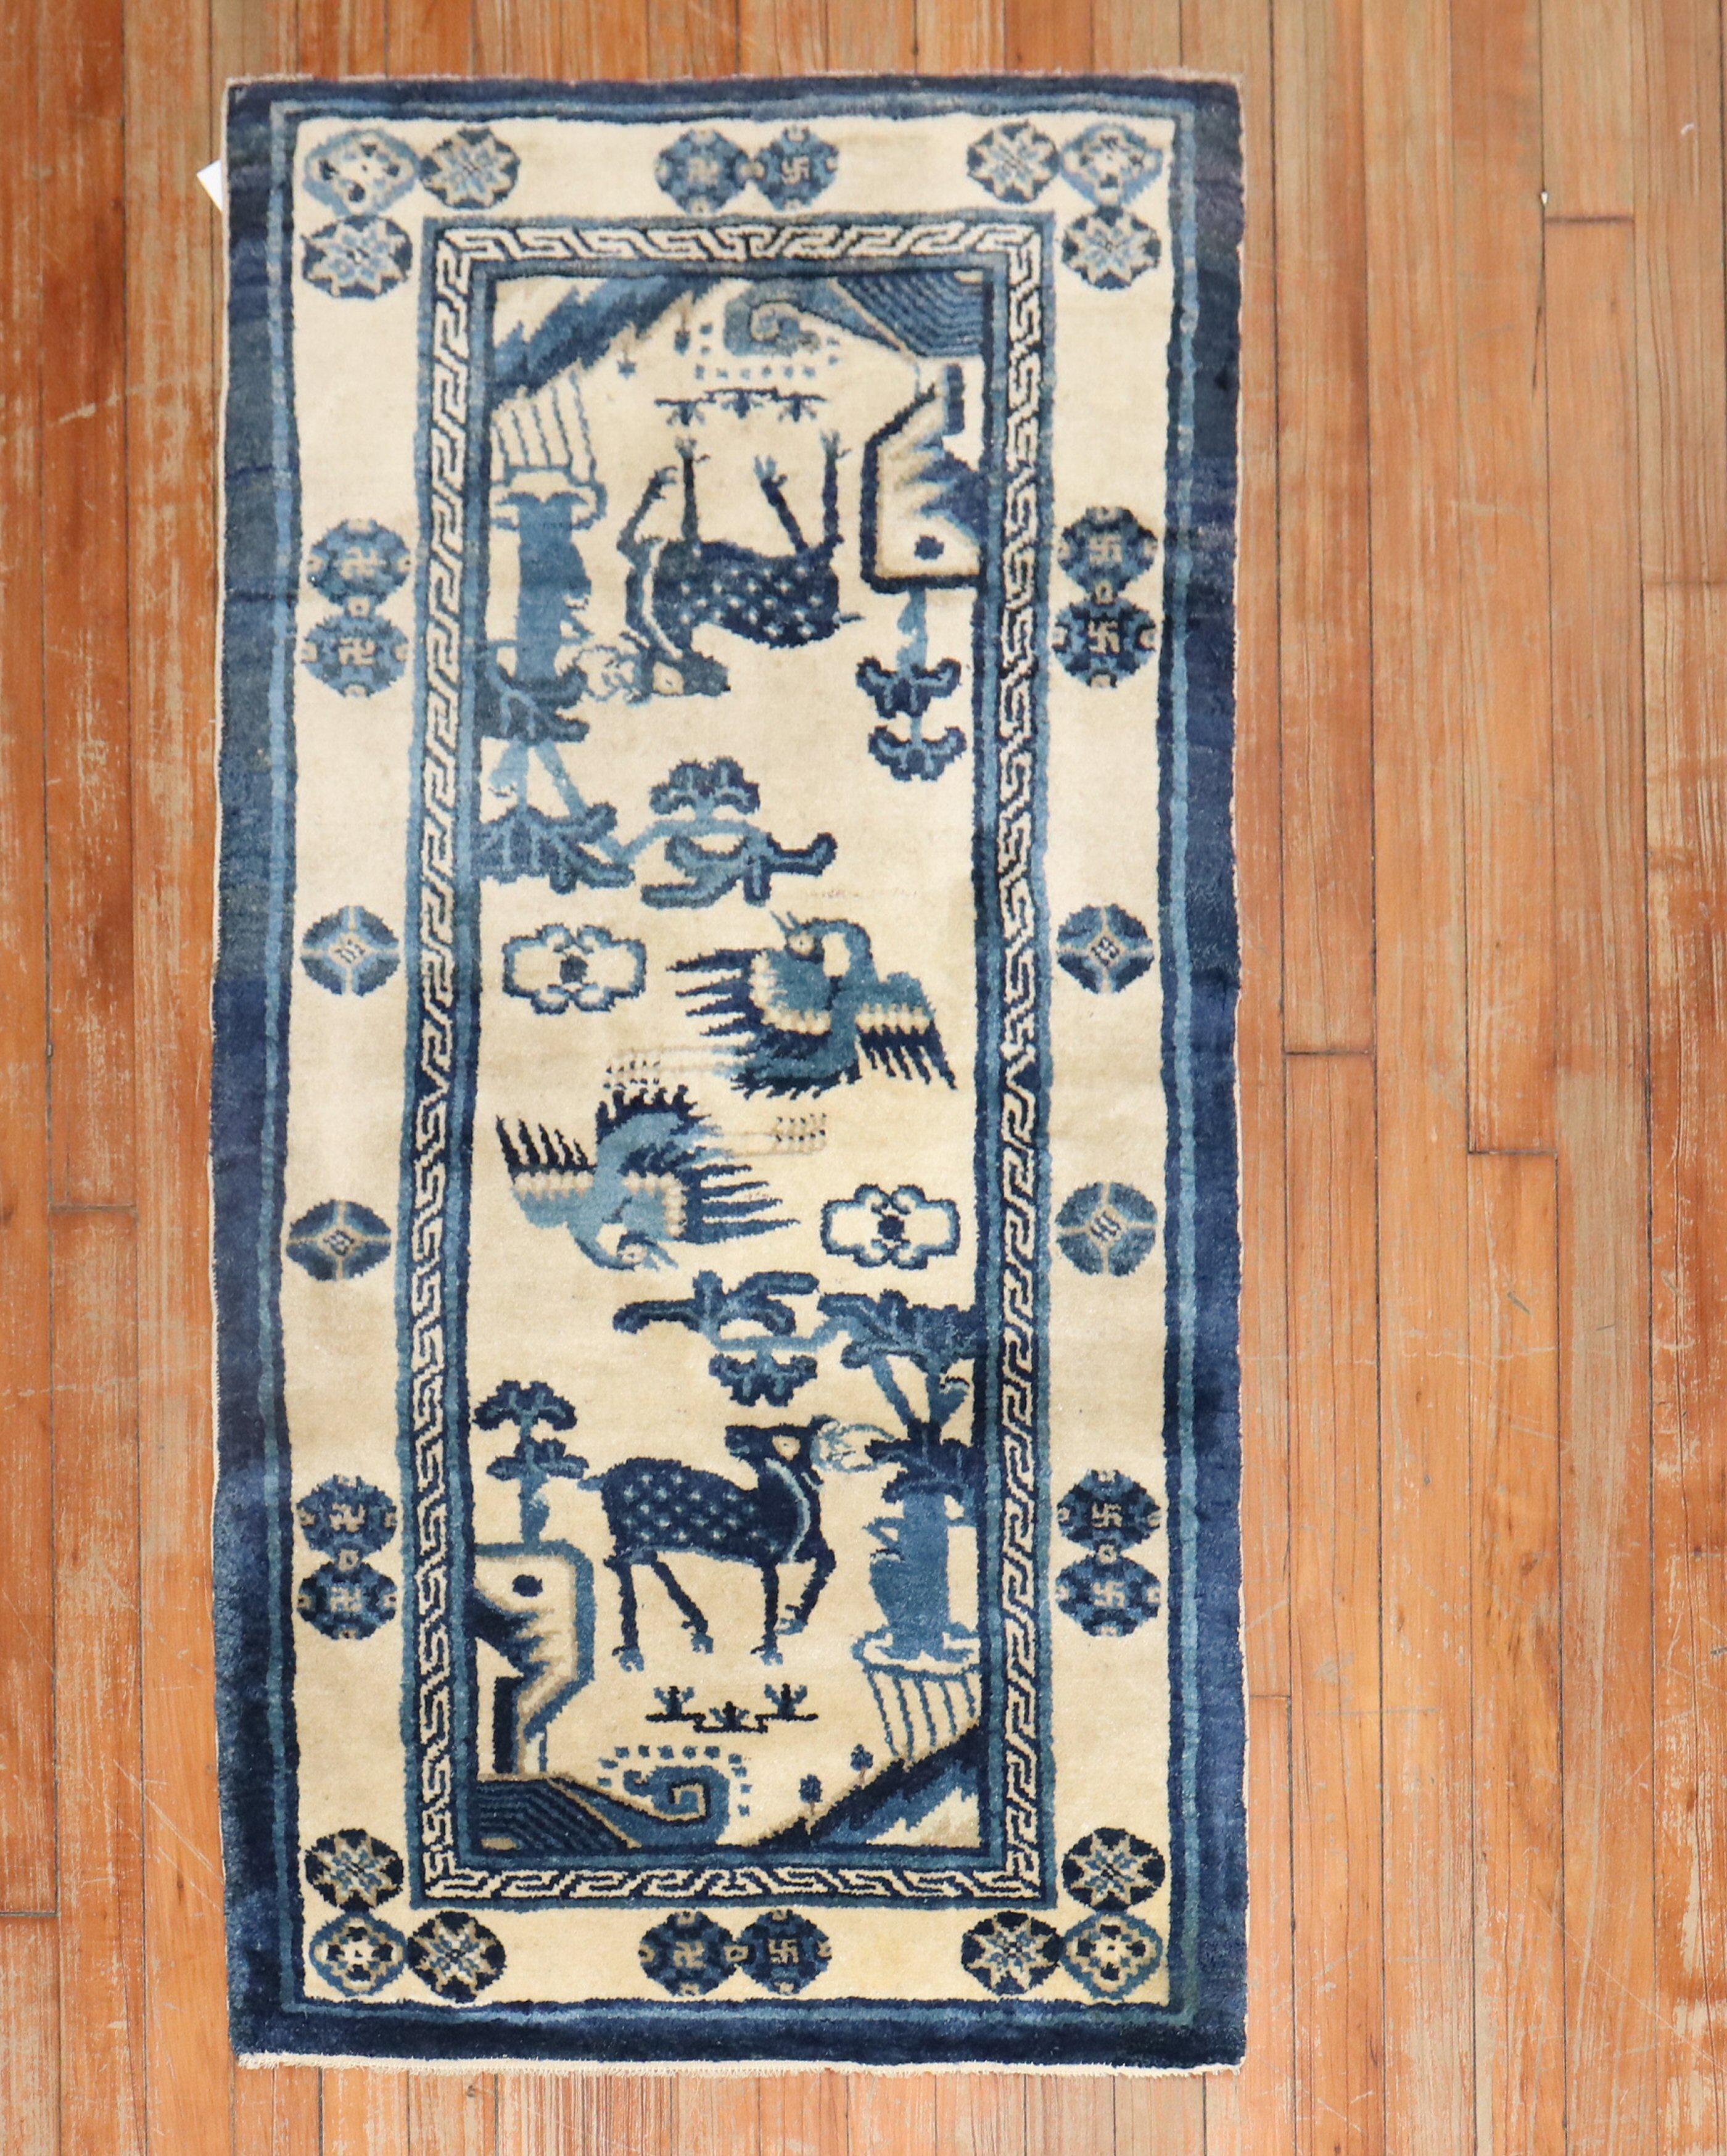 An early 20th-century Chinese Pictorial rug with an animal motif in light blue, navy and ivory

Measures: 2'3' x 4'5''.